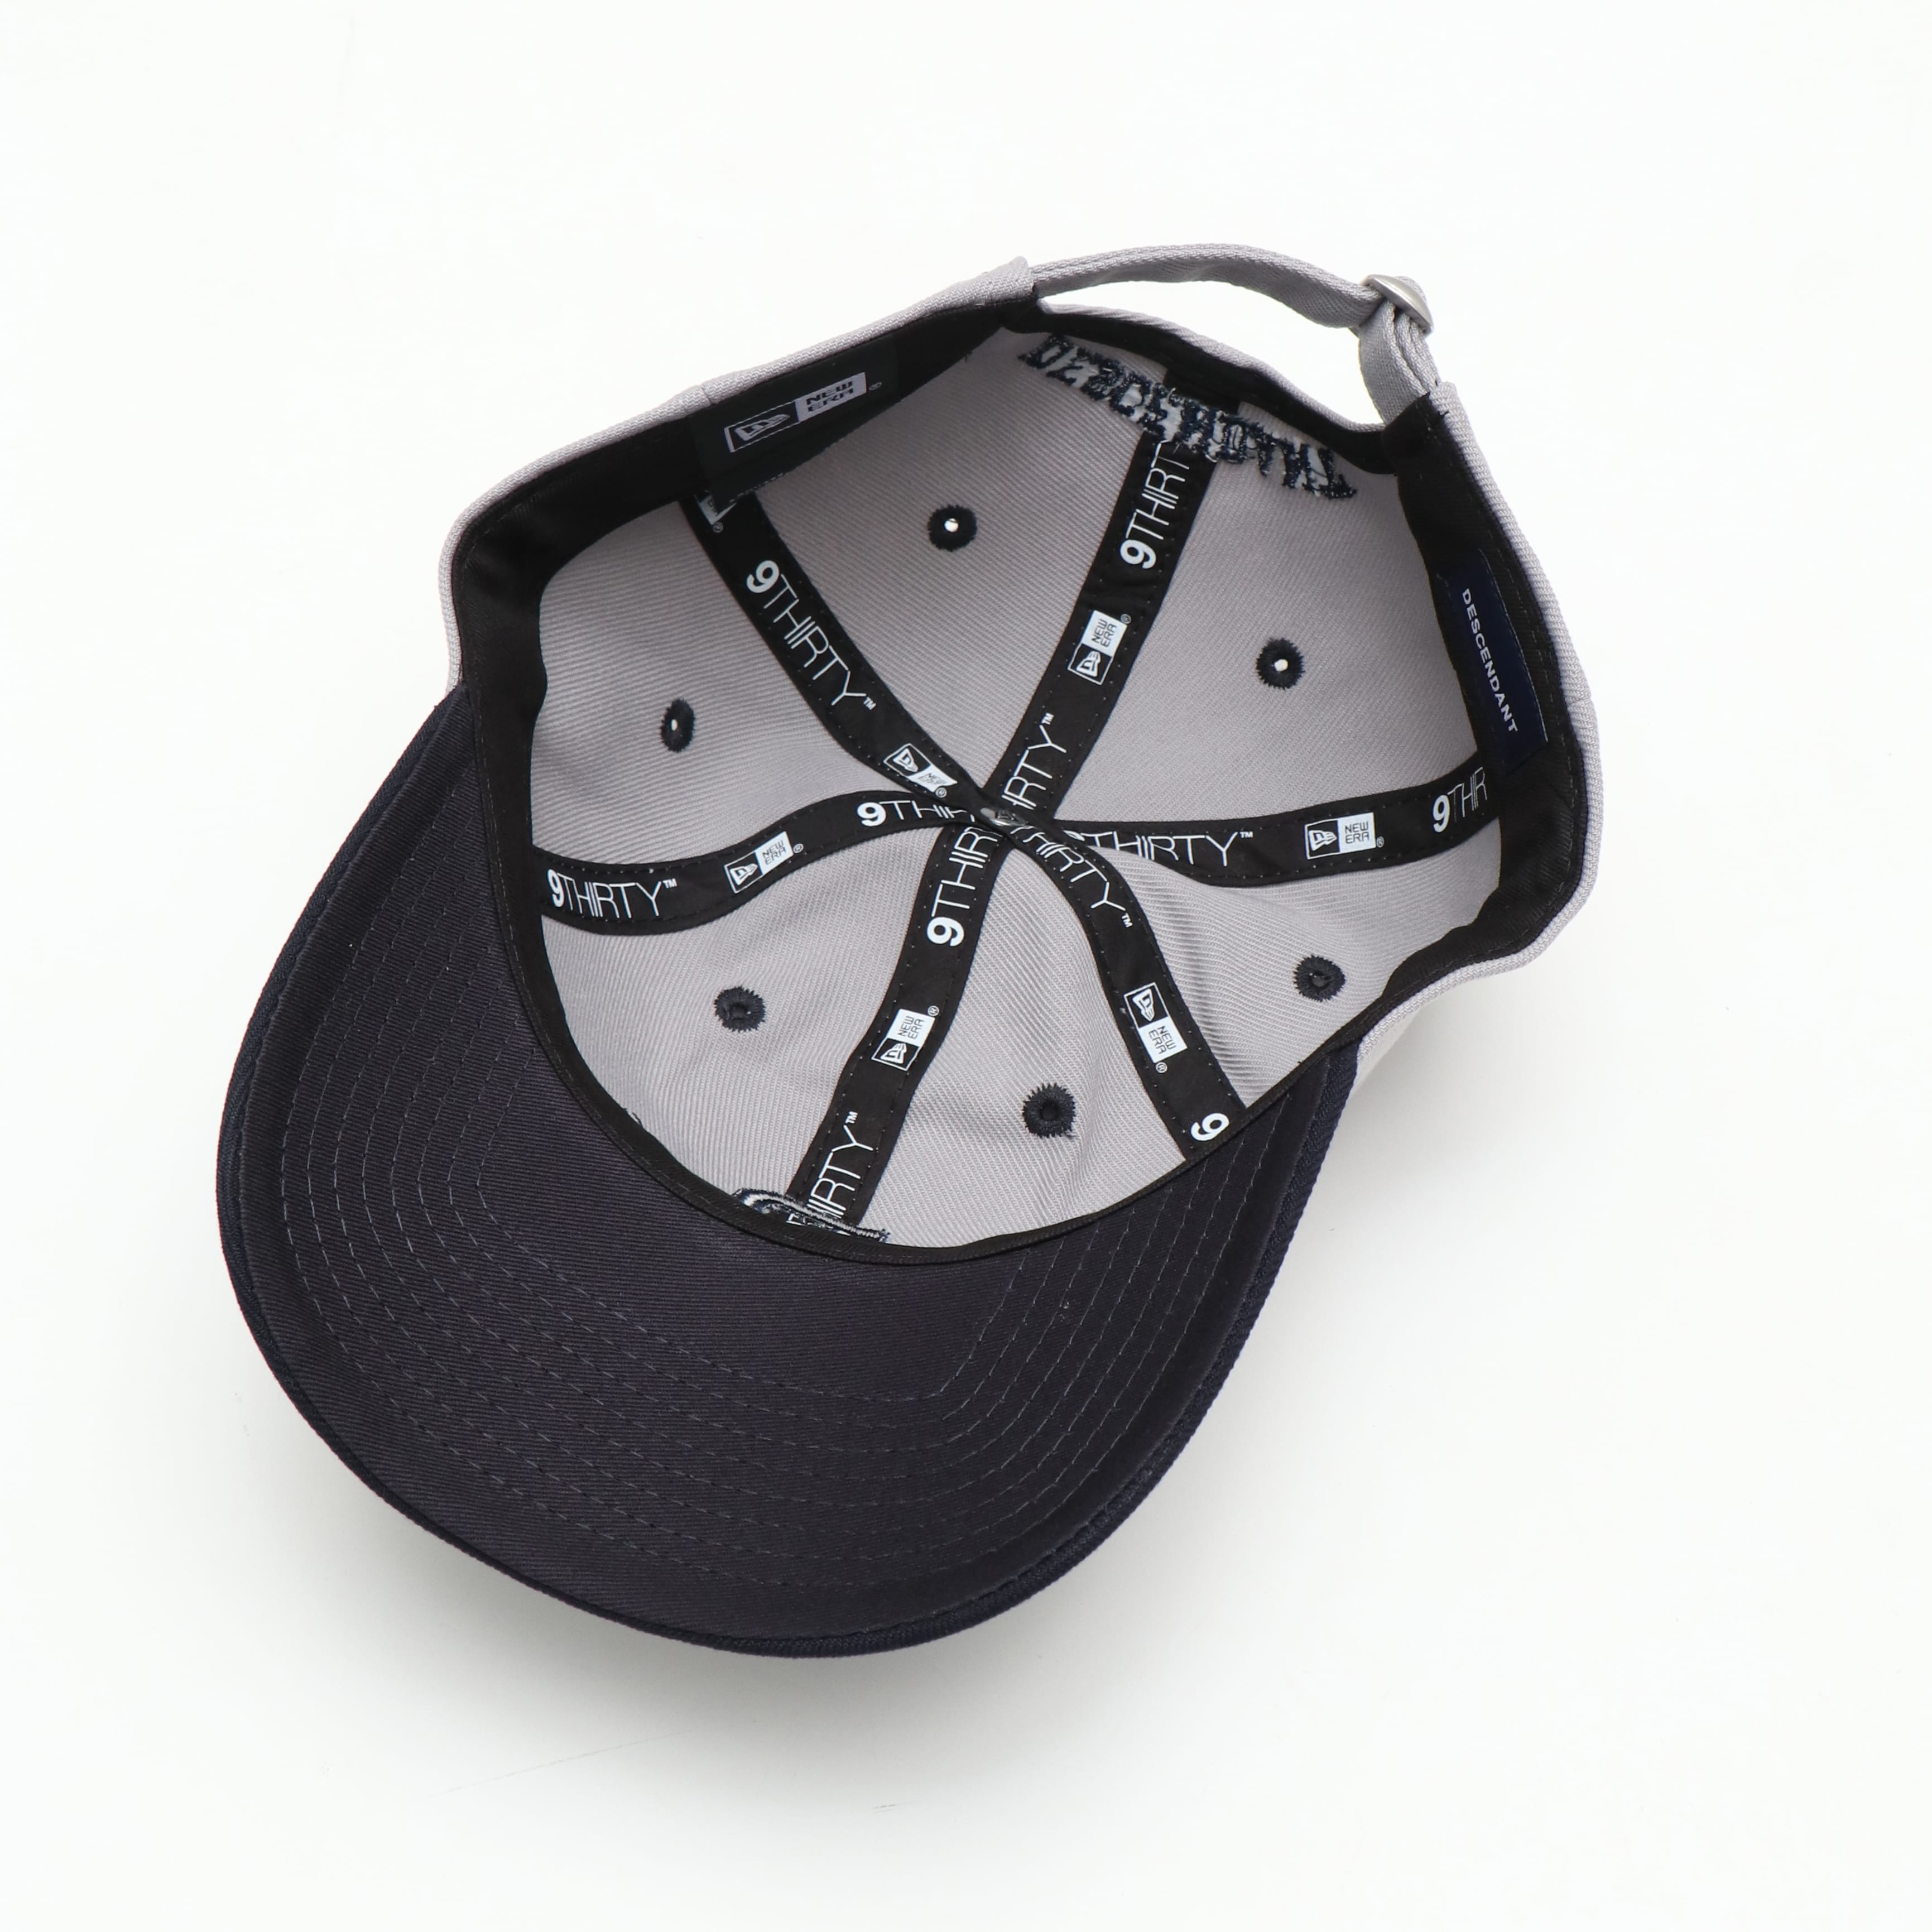 CROSS PADDLE 9THIRTY NEWERA GRAY – TIME AFTER TIME